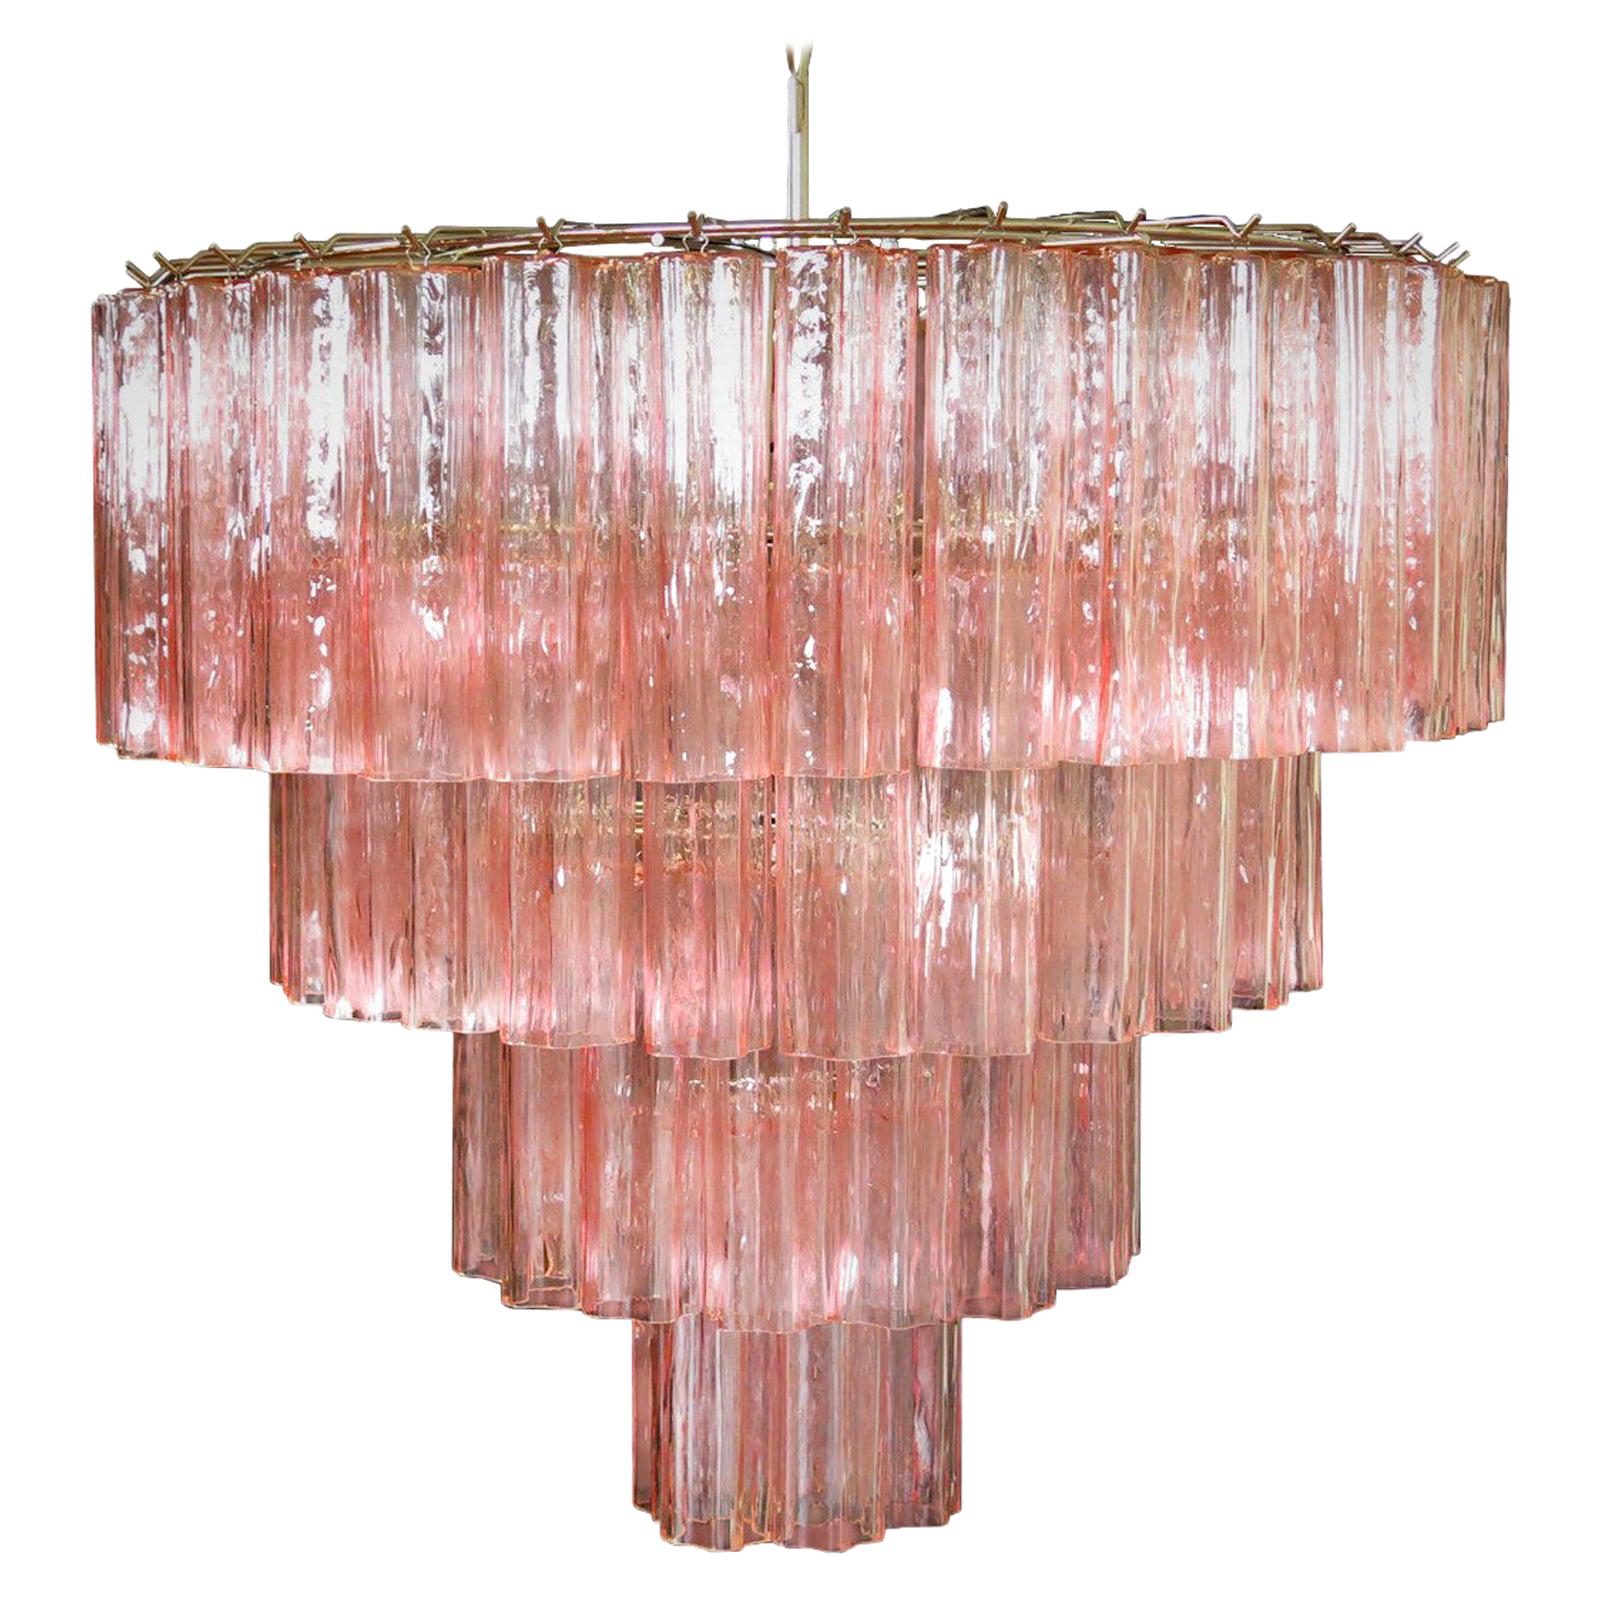 Italian vintage chandelier in Murano glass and nickel-plated metal structure on 4 levels. The armor polished nickel supports 78 large pink glass tubes in a star shape.
Period: Late 20th century
Dimensions: 63 inches (160 cm) height with chain, 35.45